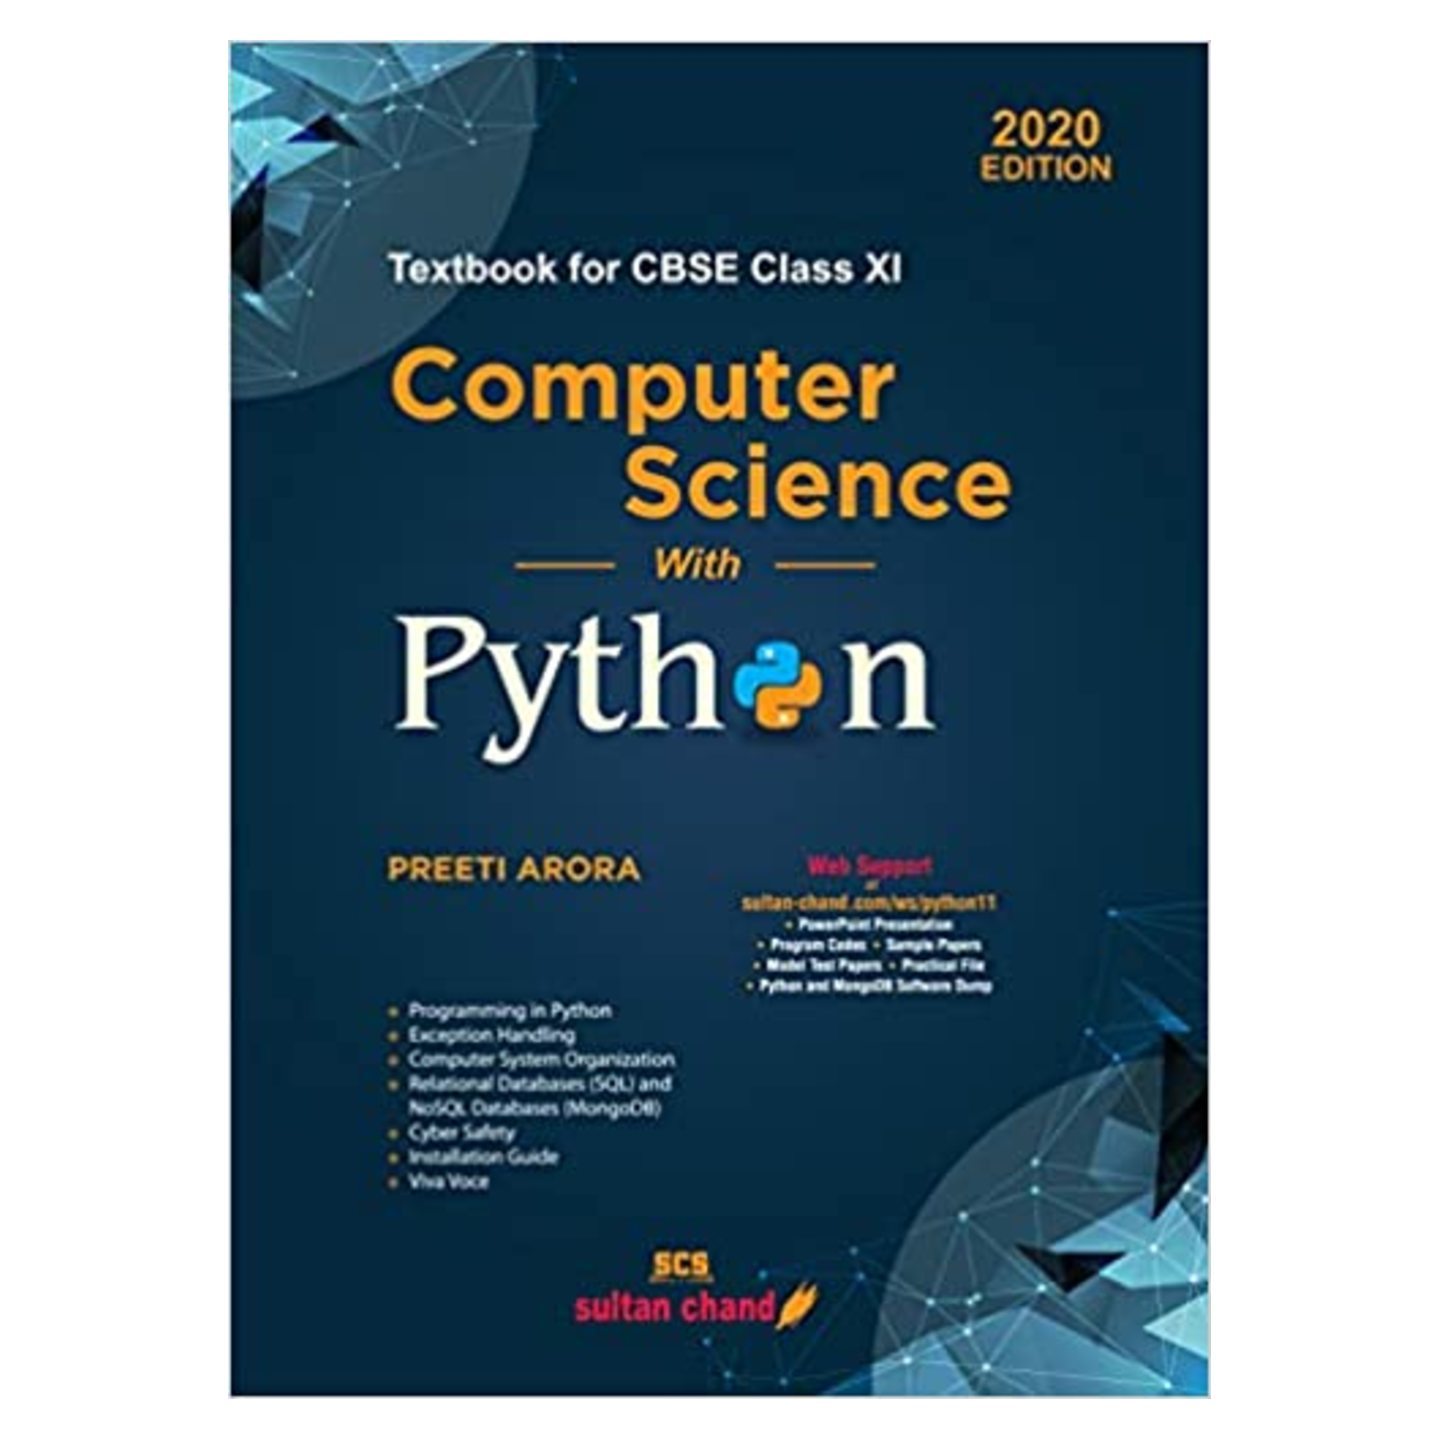 Computer Science with Python Textbook for CBSE Class 11 PREETI ARORA